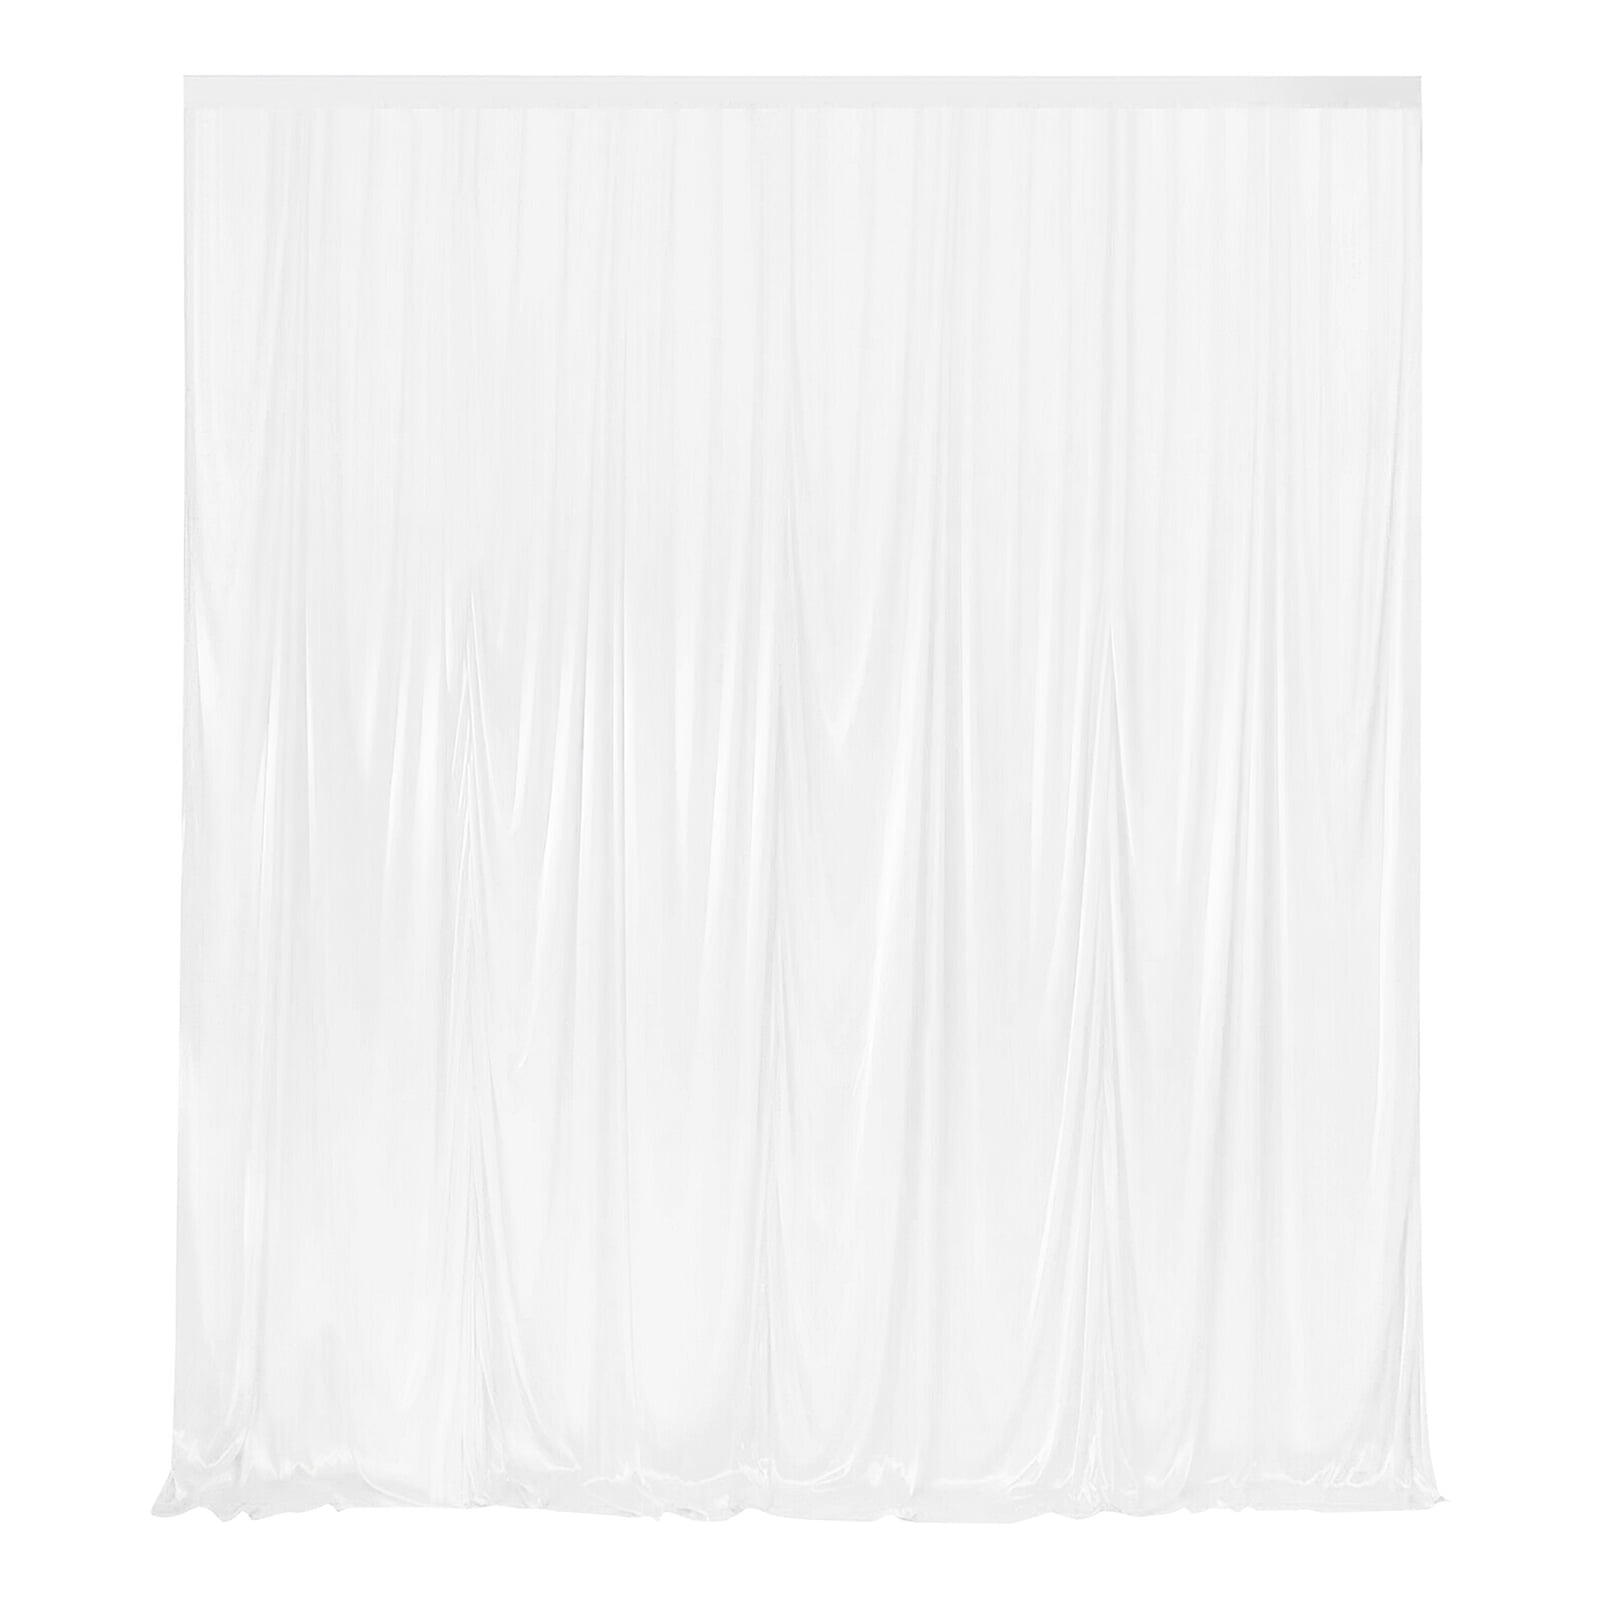 Onever 2*2m White Background Cloth Anti-Wrinkle Backdrop Curtain Decoration  Stain Resistant |Wedding Household Photography Curtain for Wedding Stage  Party | Walmart Canada